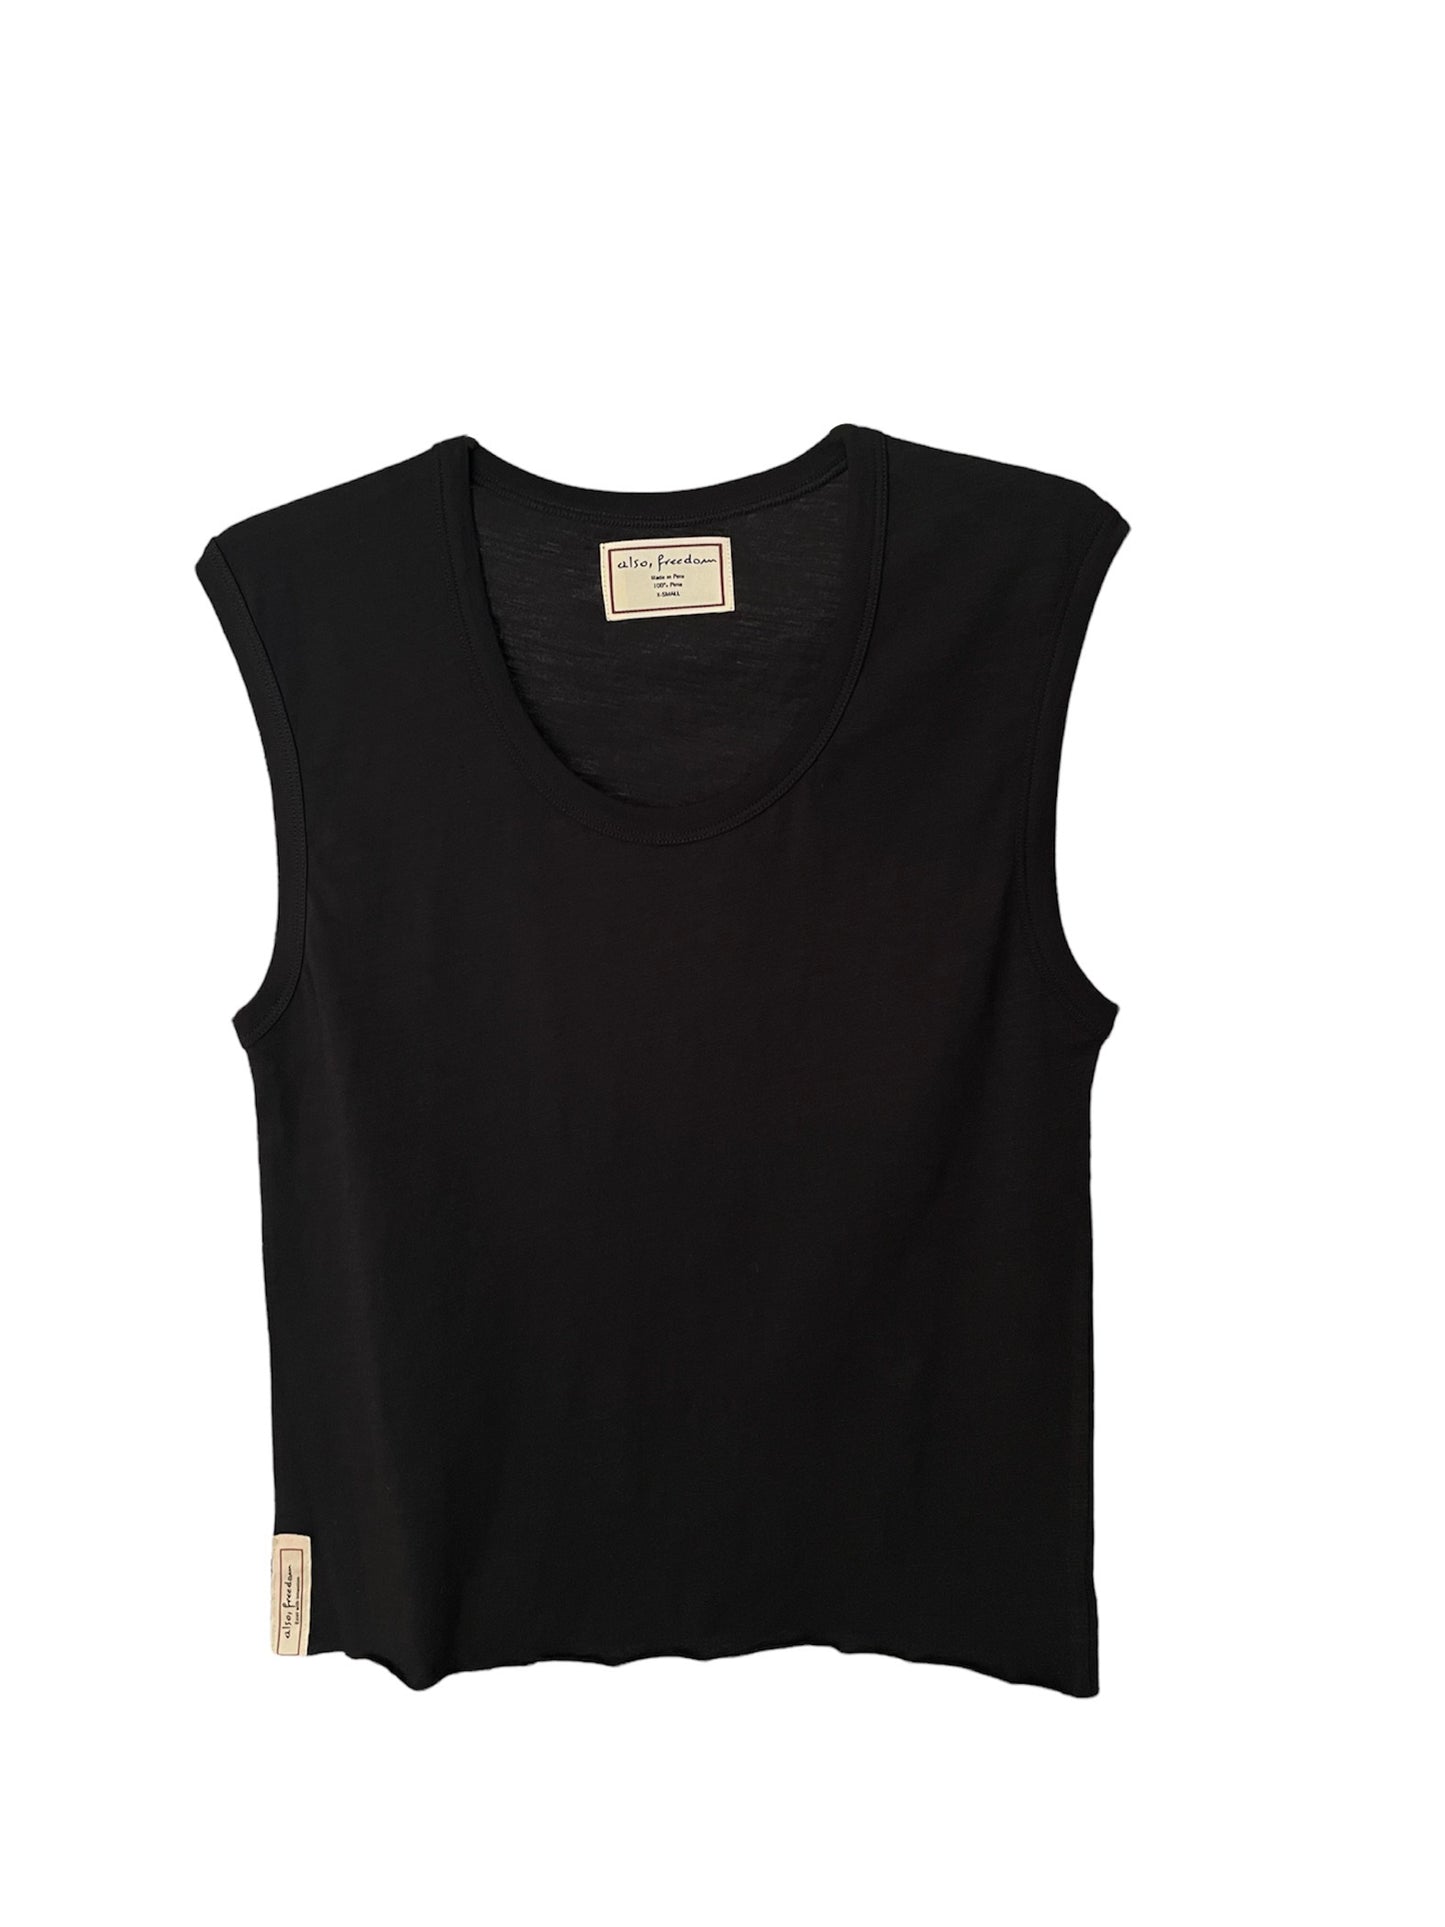 The Purist Scoop Slub, Air Muscle Tee - Also, Freedom